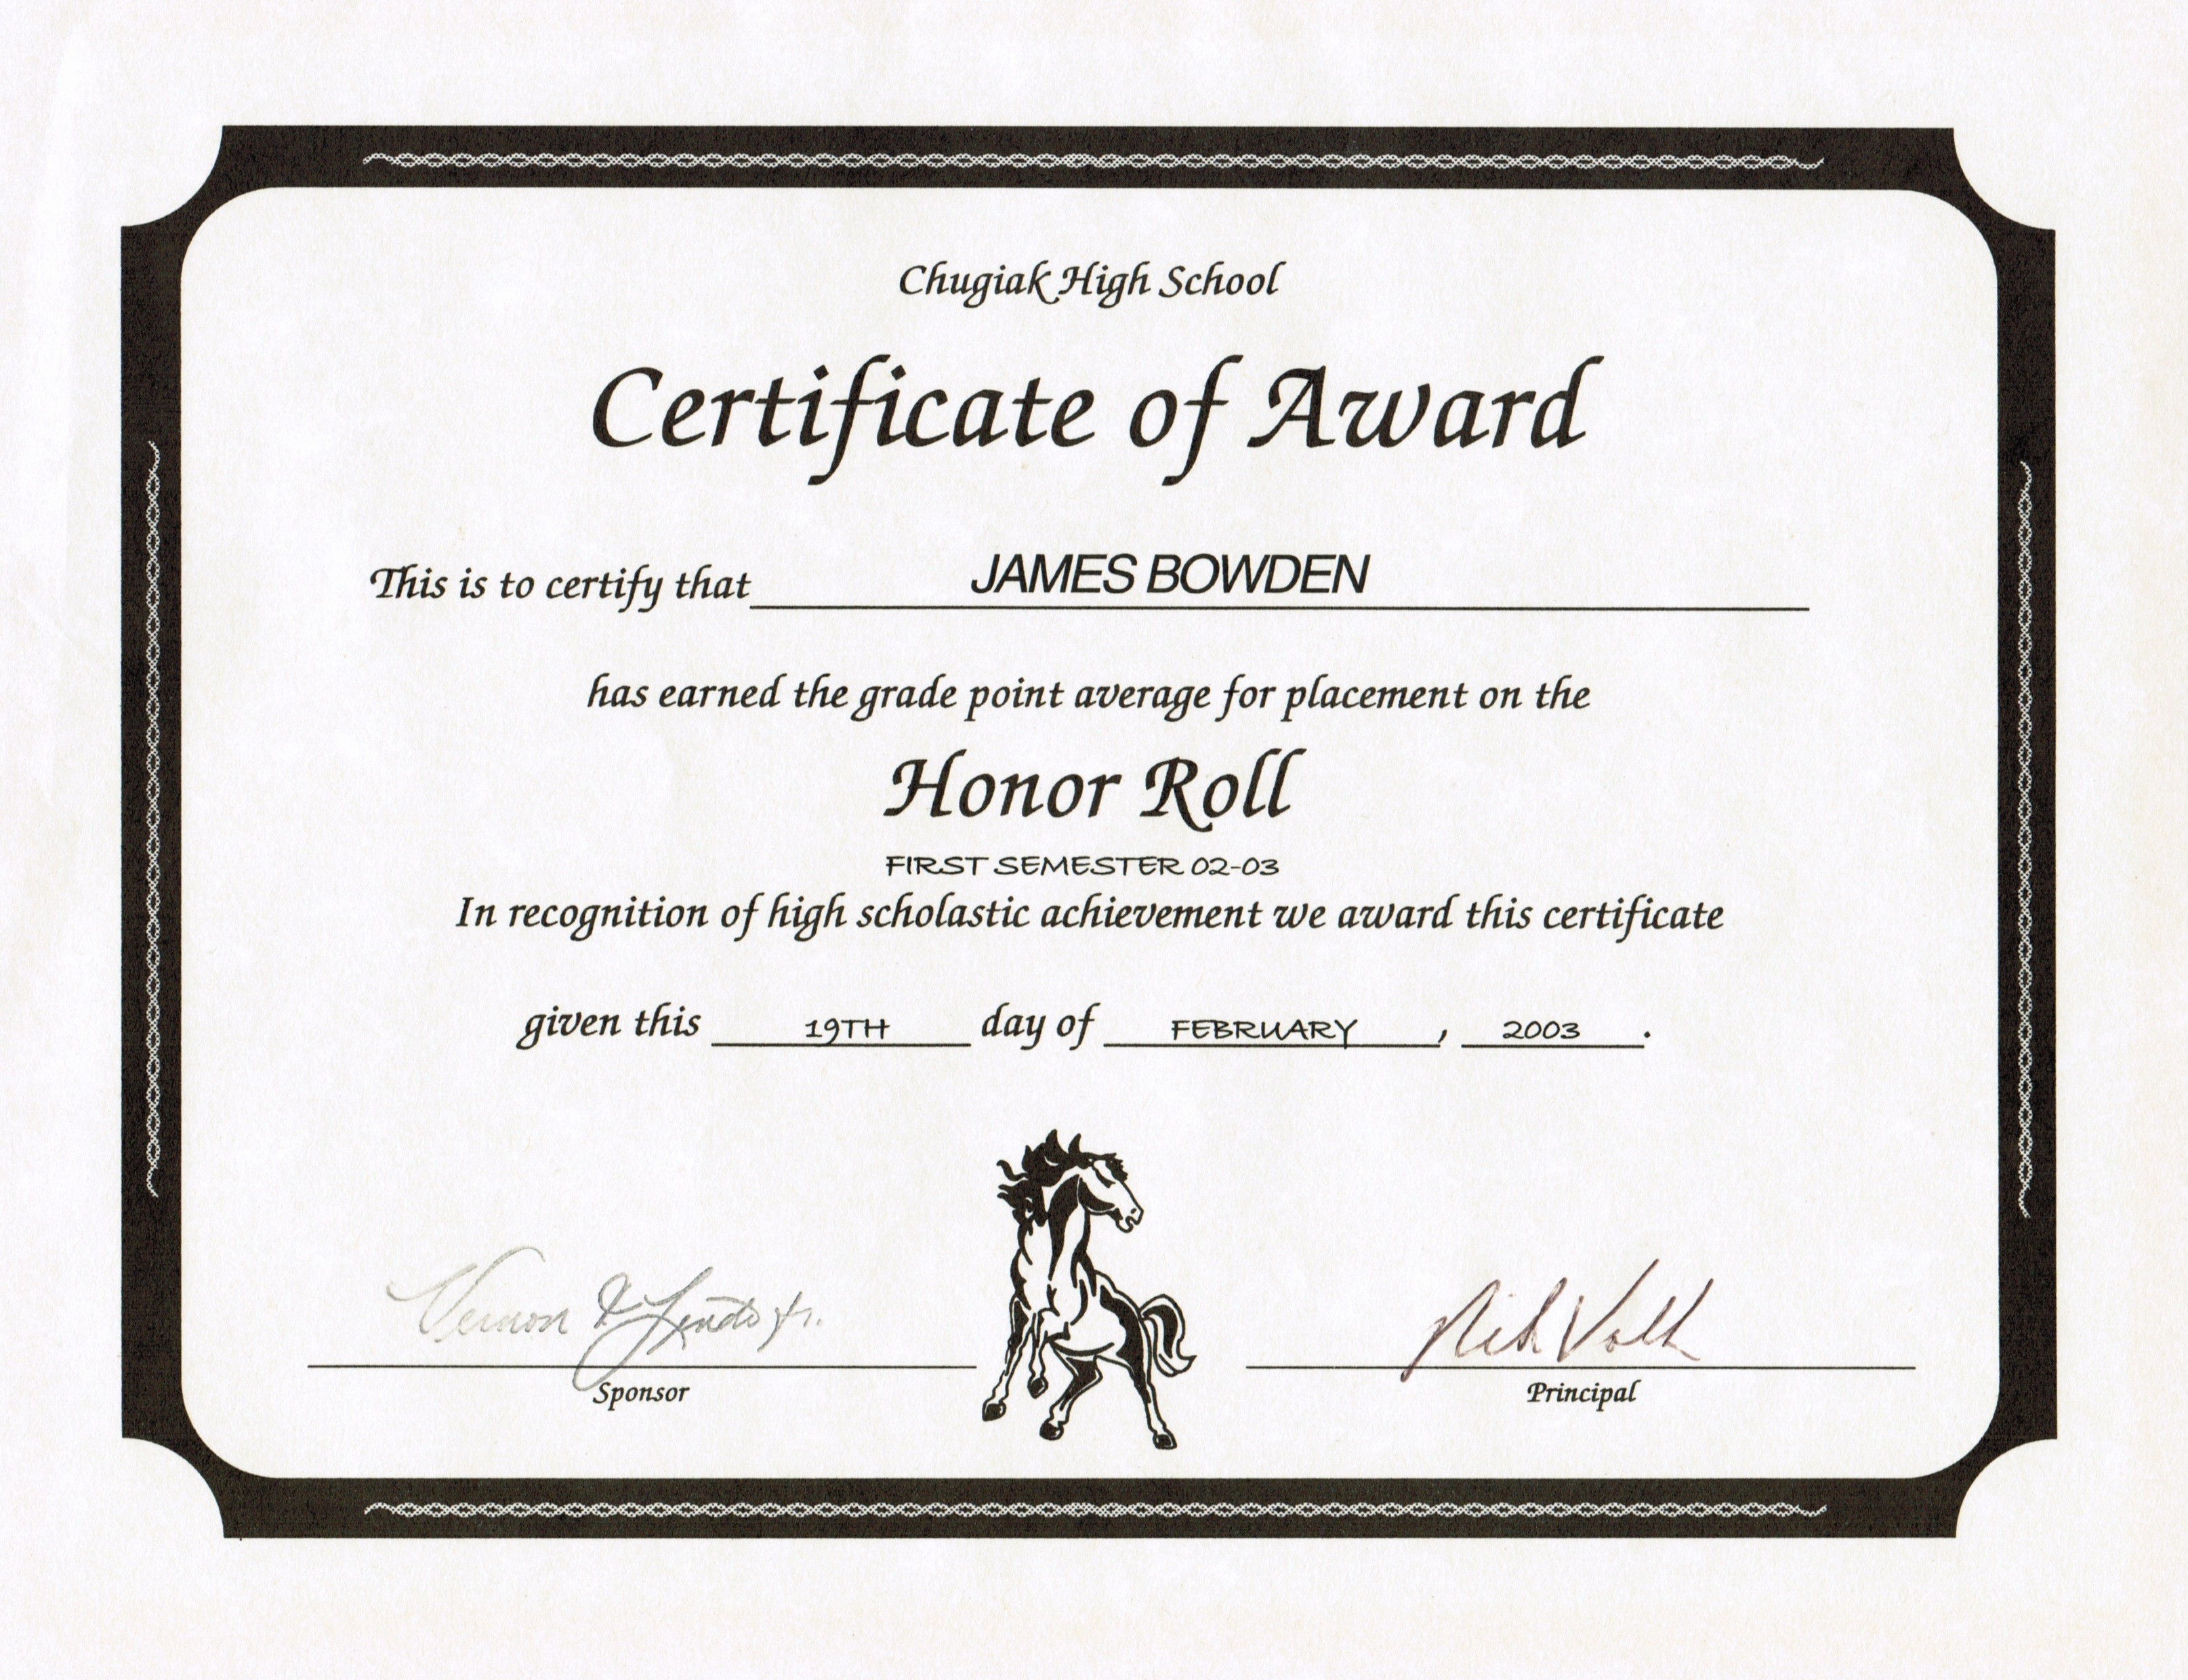 Honor Roll Certificate Template Word Luxury 4 Awards and Certificates 2001 2010